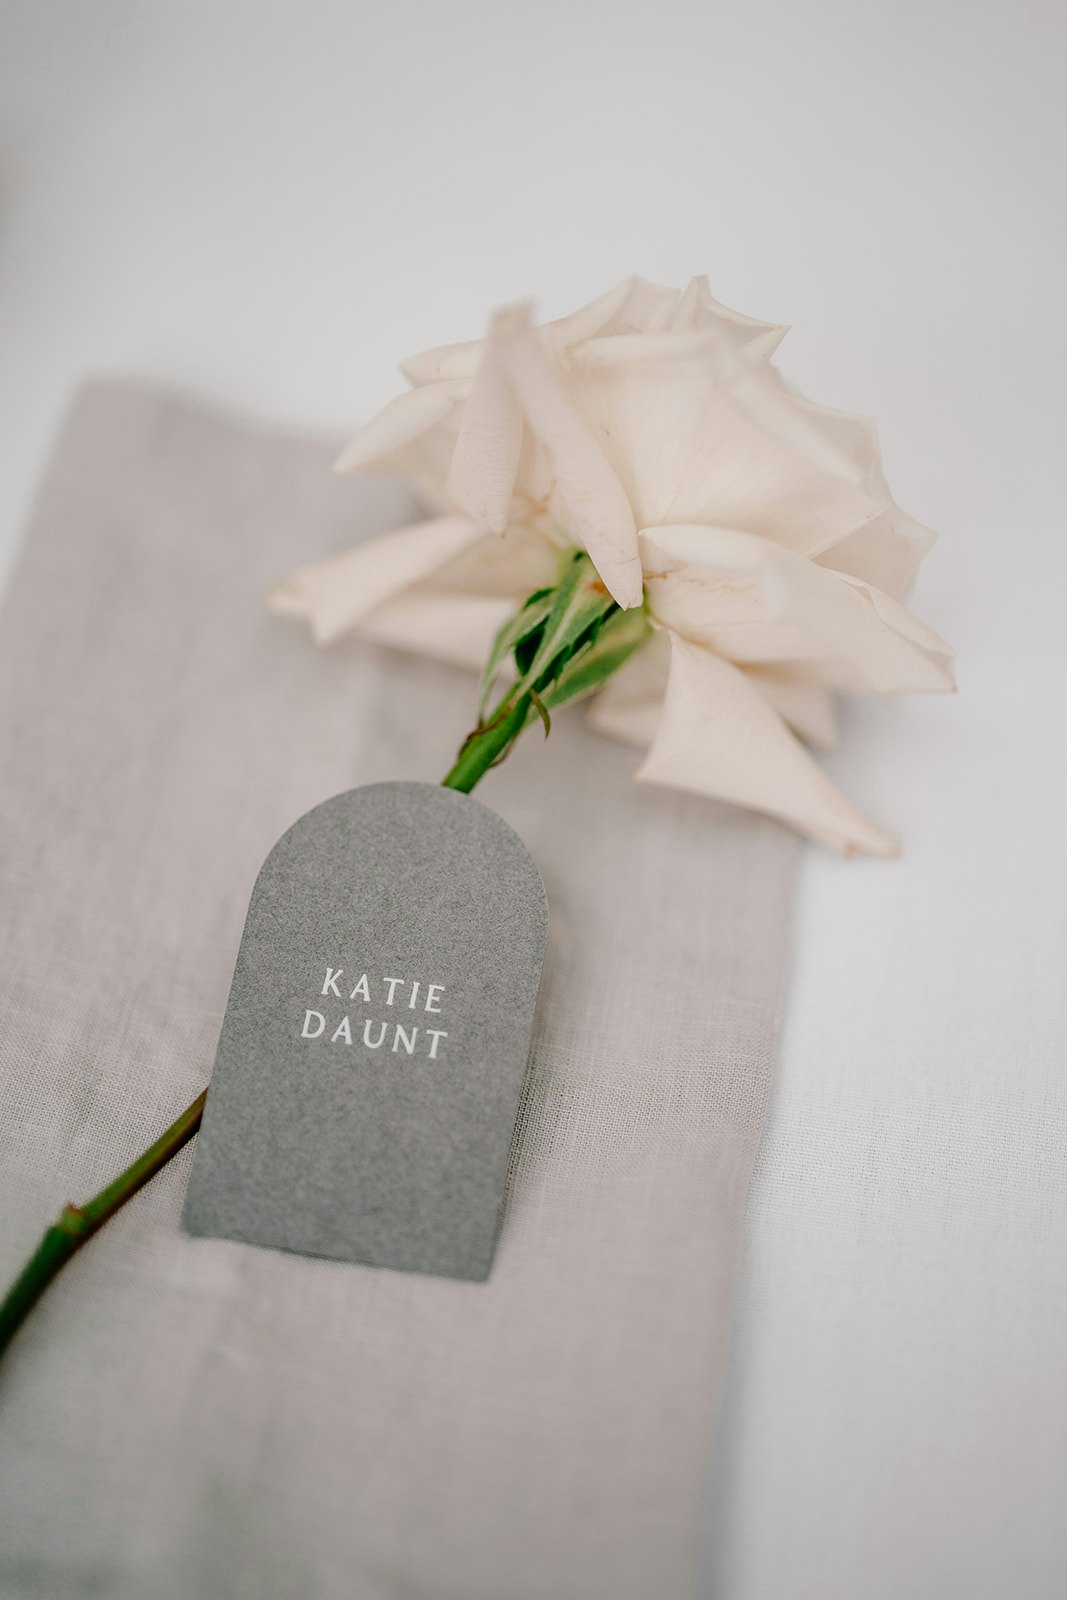 Flower and wedding place card